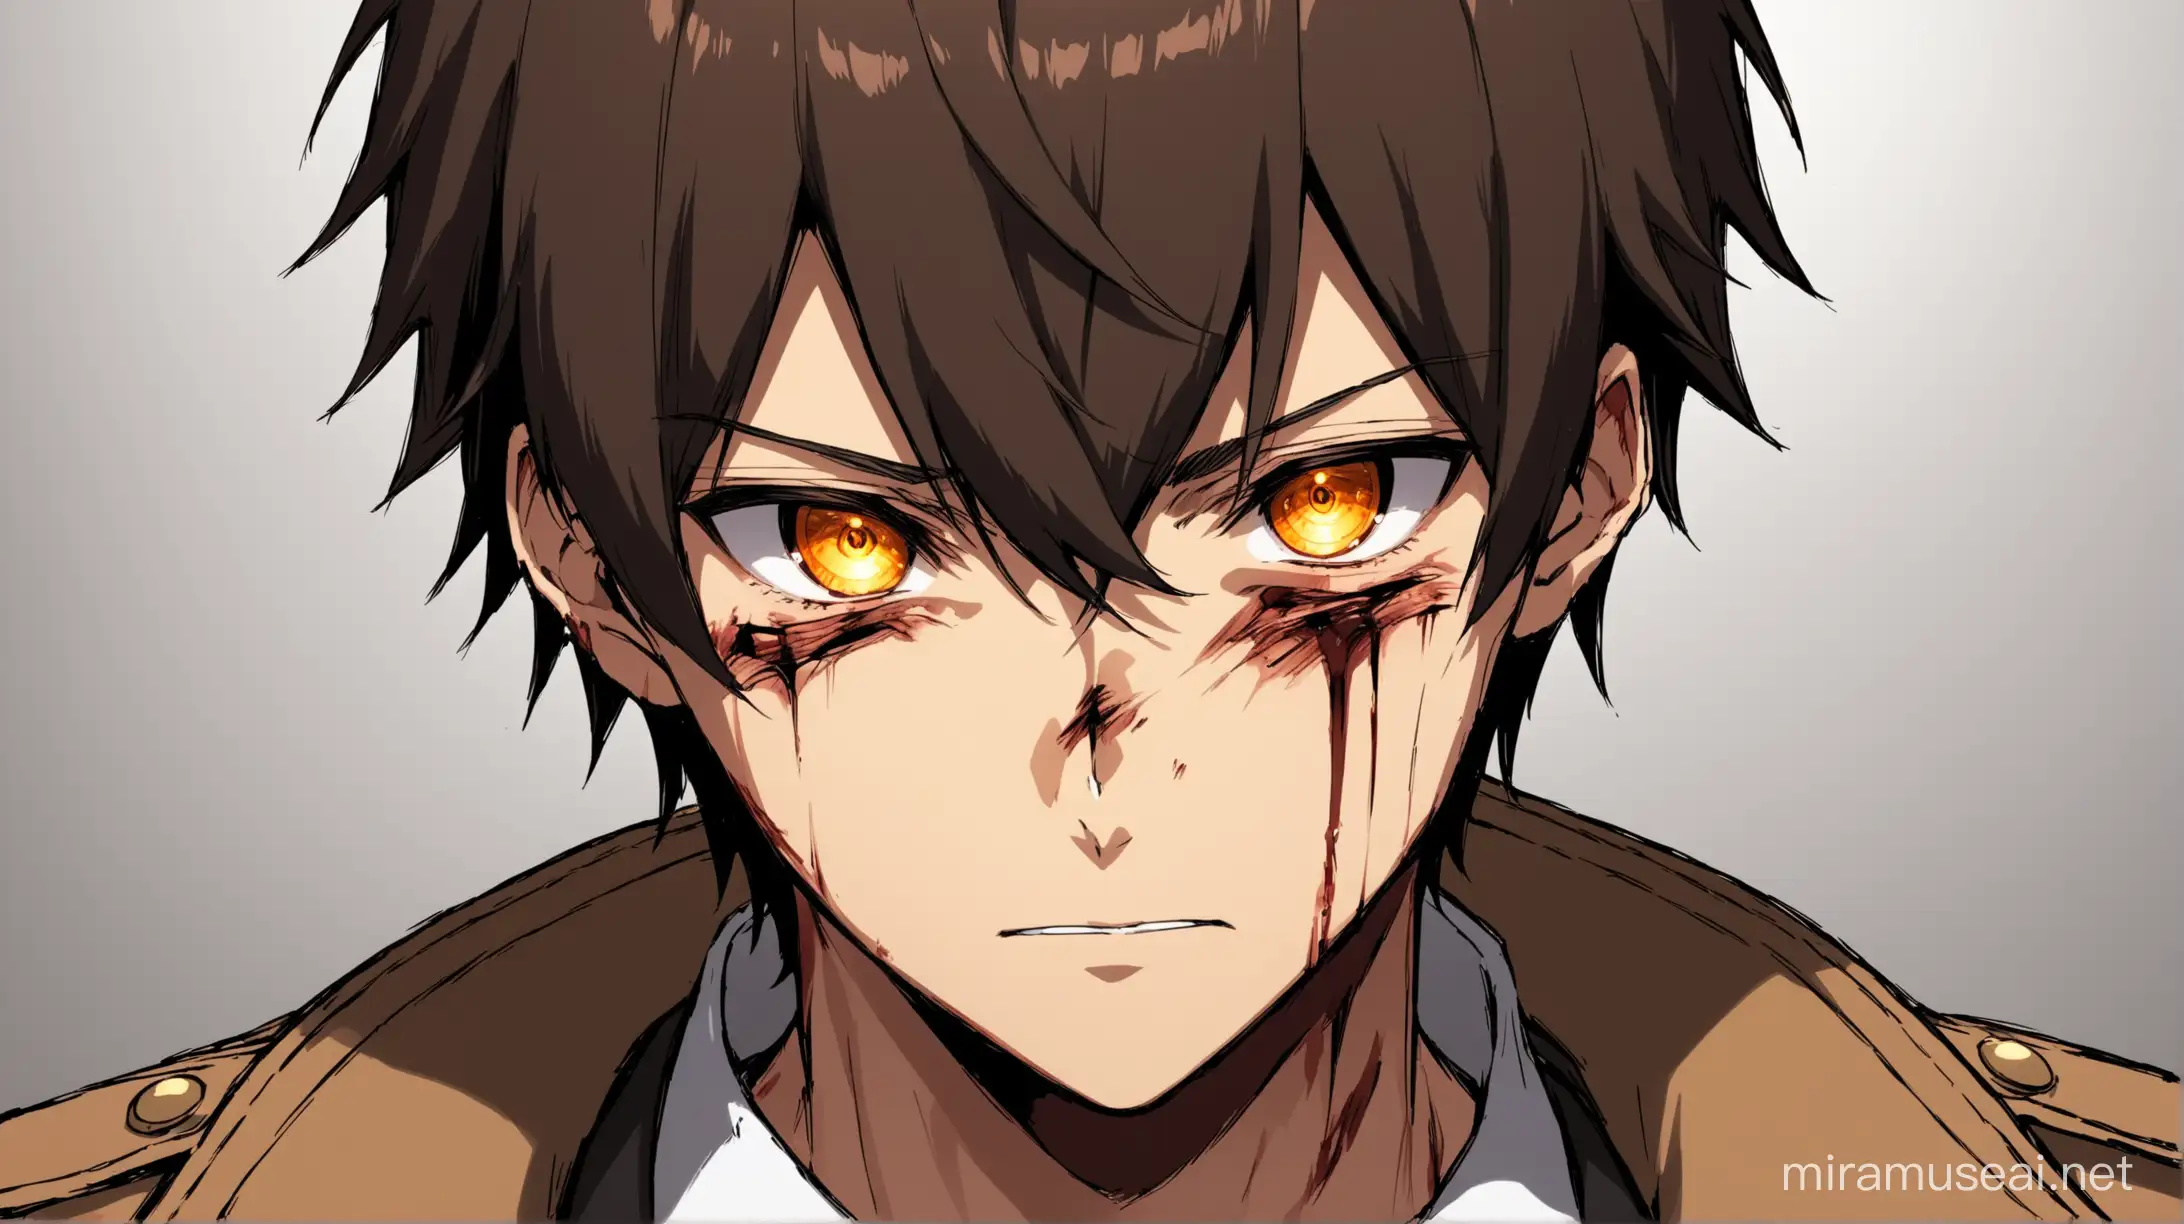 An image of face of an anime male character wearing detective clothes. He is dark brown headed and orange eyes. The image should be of his front face. His face is injured